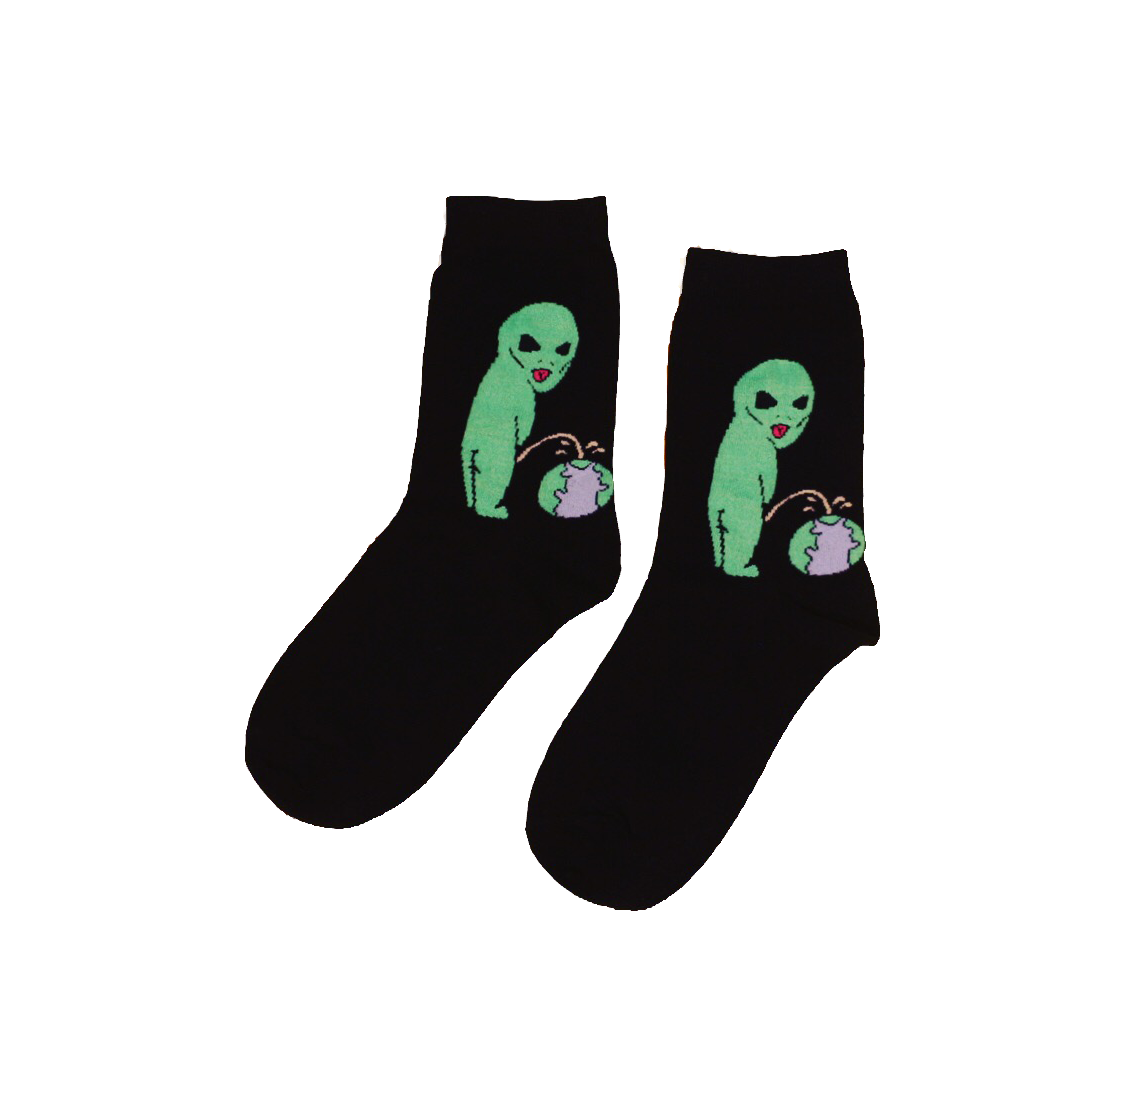 Experience ultimate comfort with our soft, stretchy, and breathable Alien Socks. Perfectly paired with sneakers or boots, available in a variety of colors.